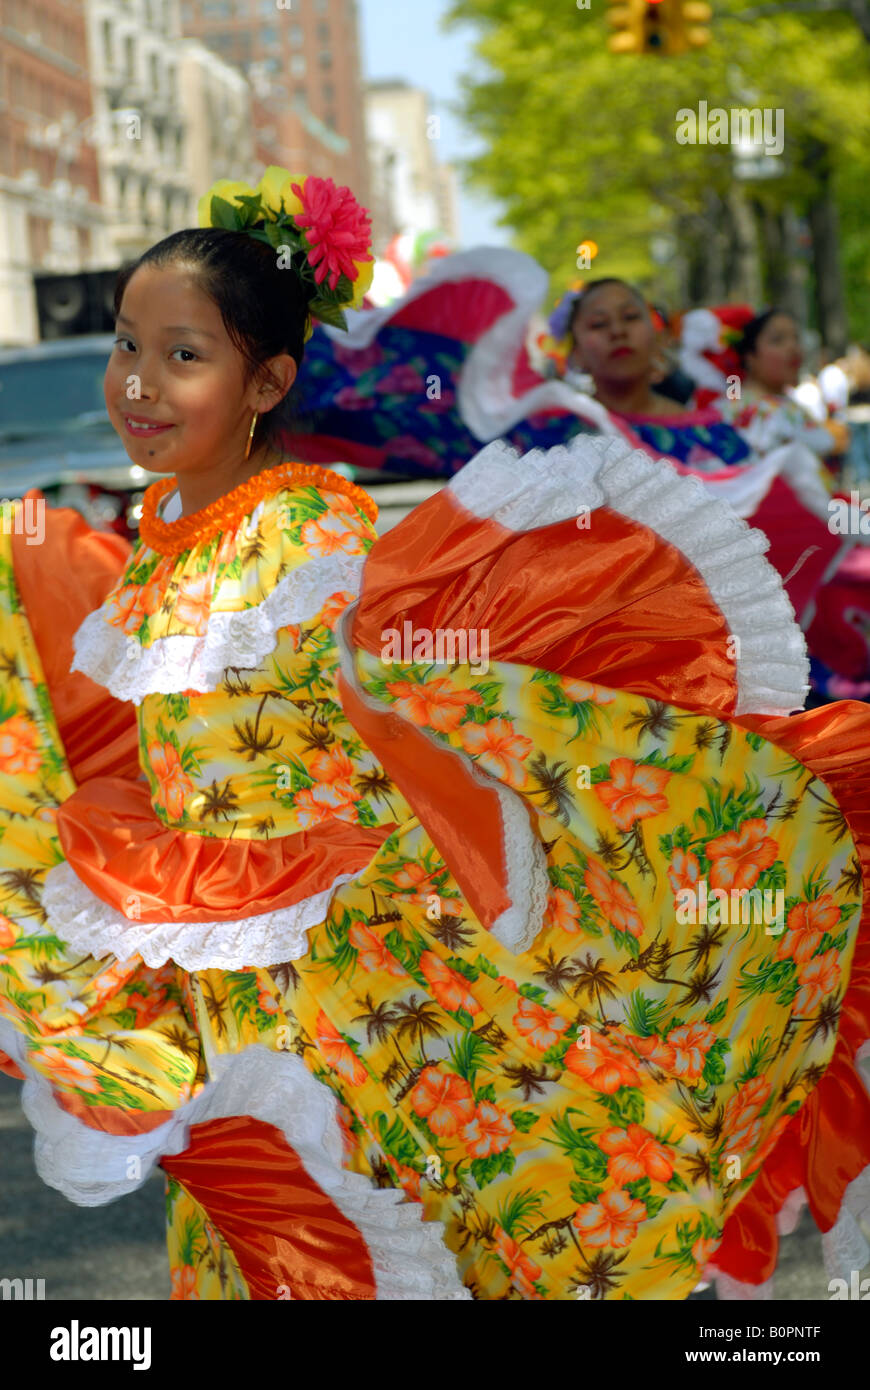 Mexican Americans in the Cinco de Mayo Parade in New York Stock Photo